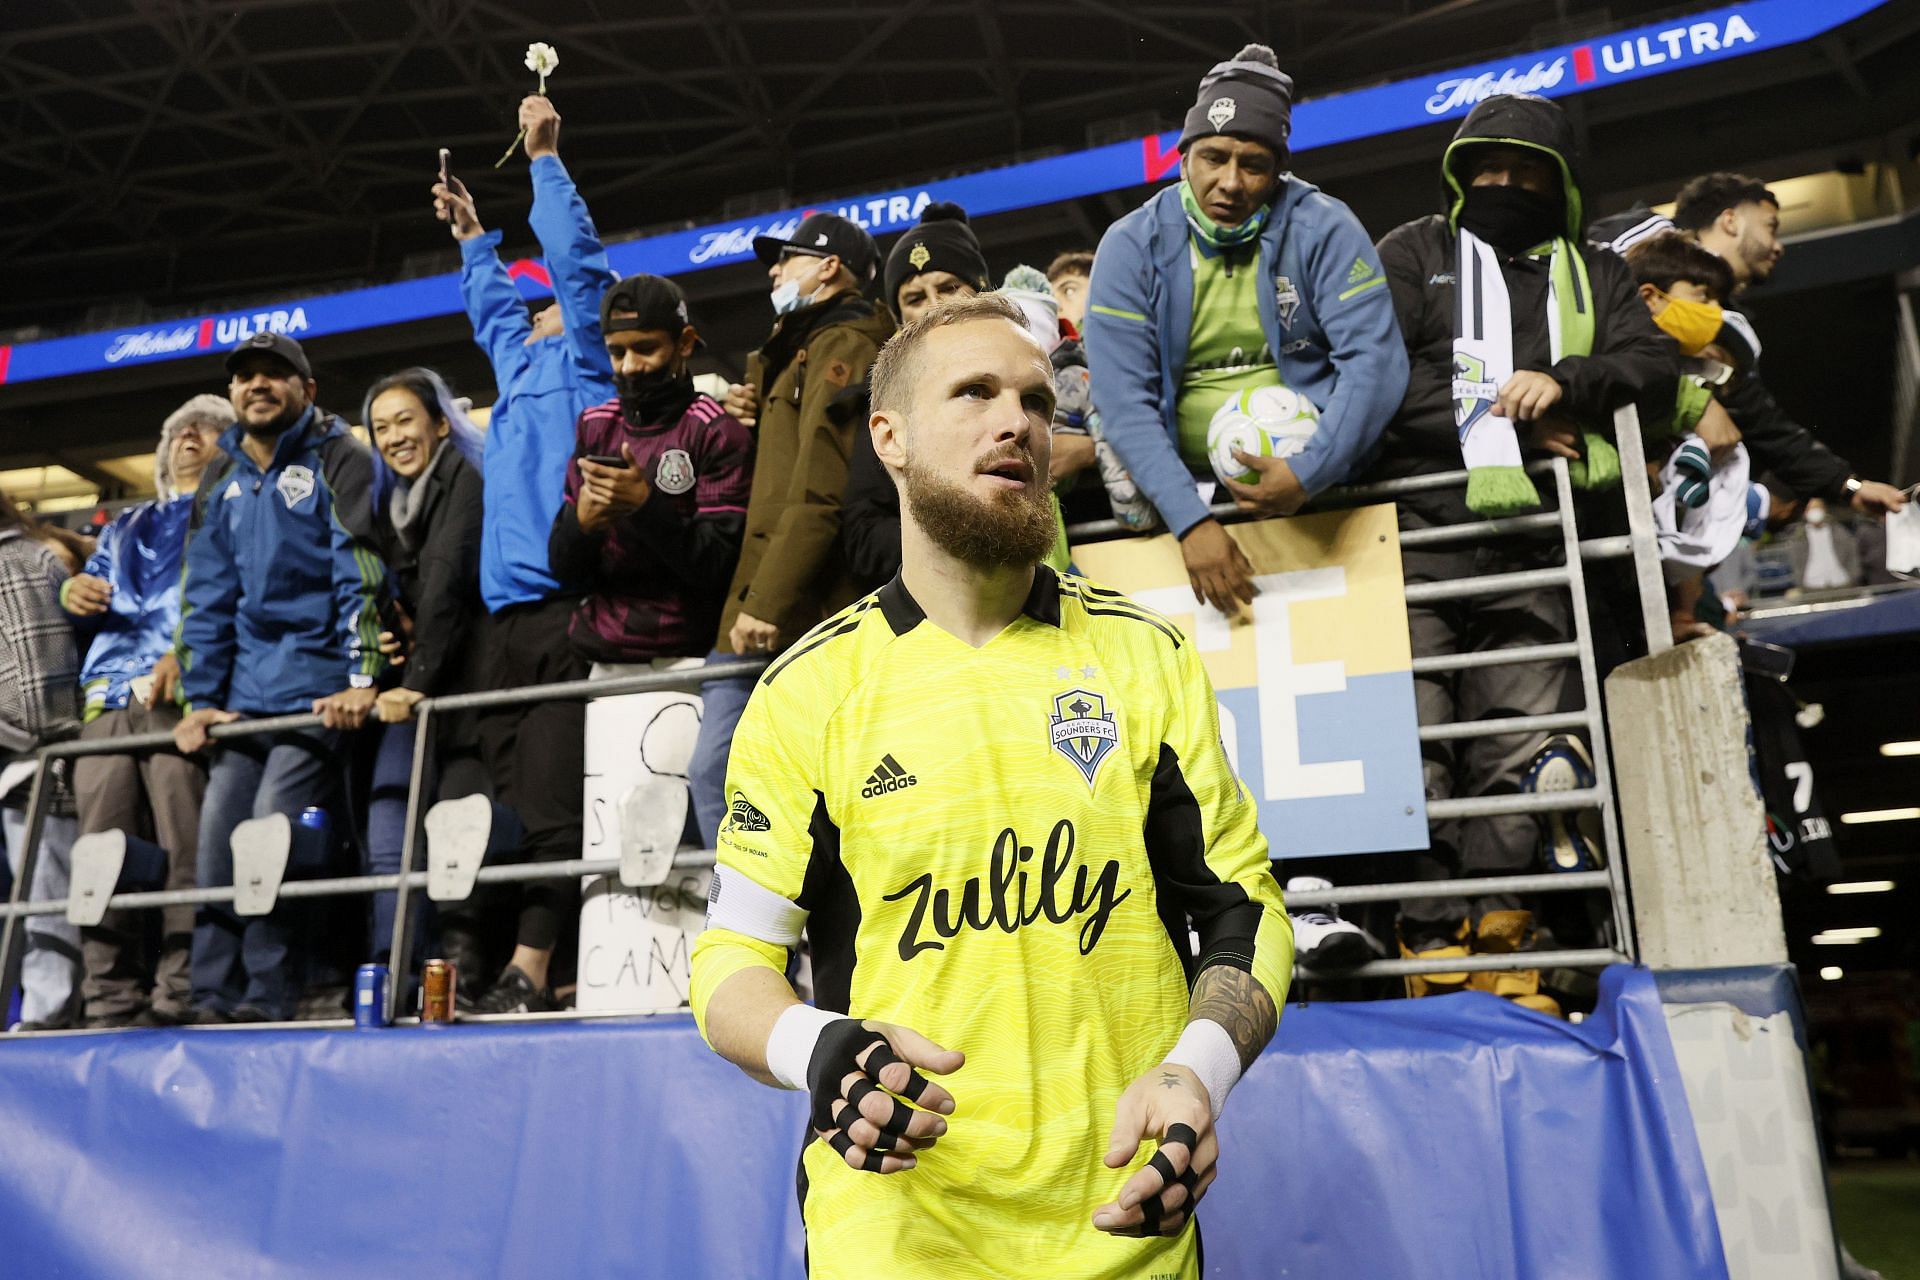 Seattle Sounders face Leon in their CONCACAF Champions League fixture on Tuesday